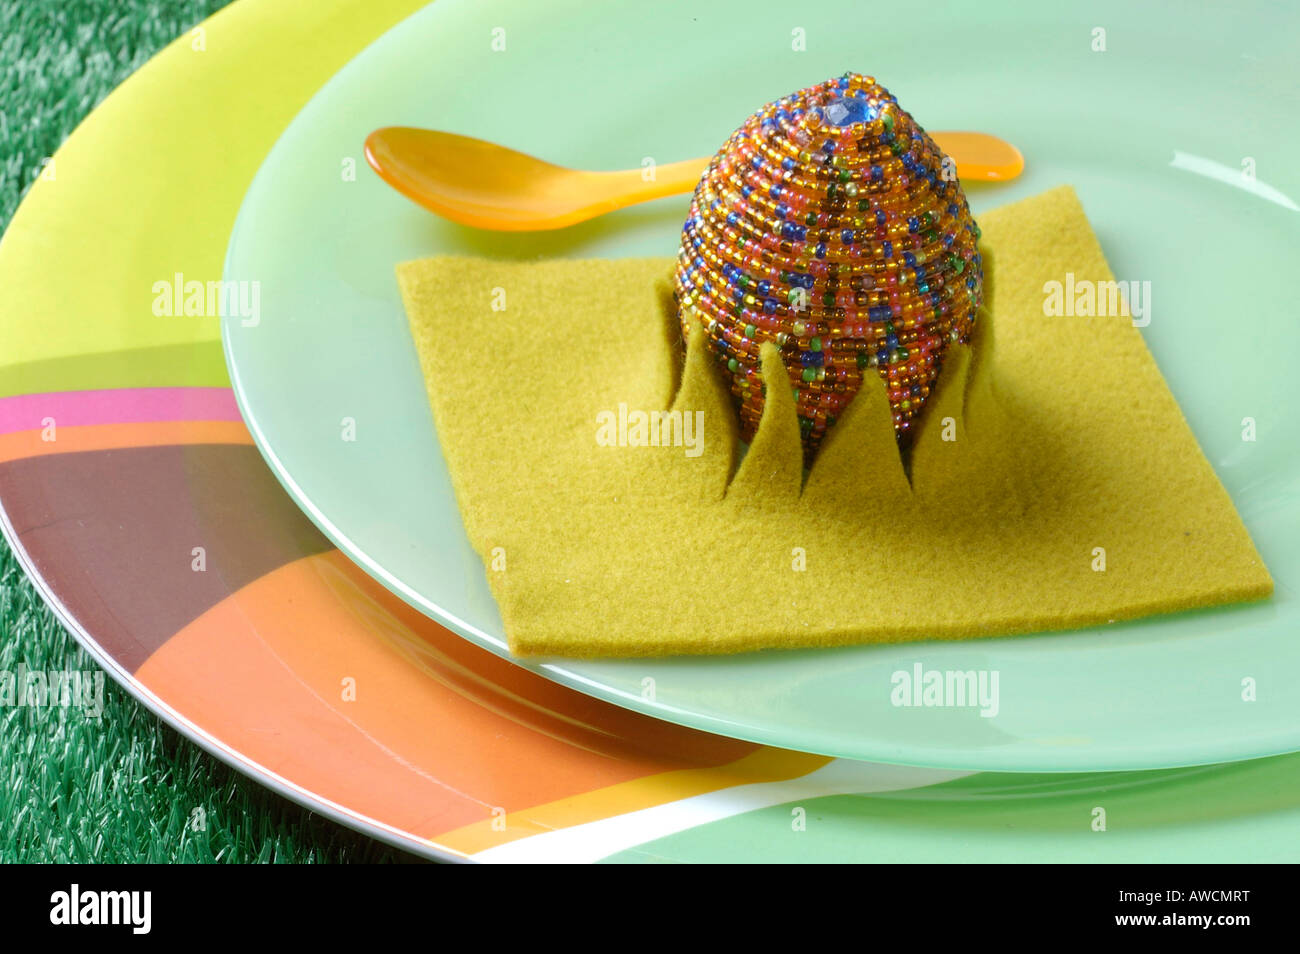 Colourful Easter egg with beads in felt cup on green and coloured plate Stock Photo